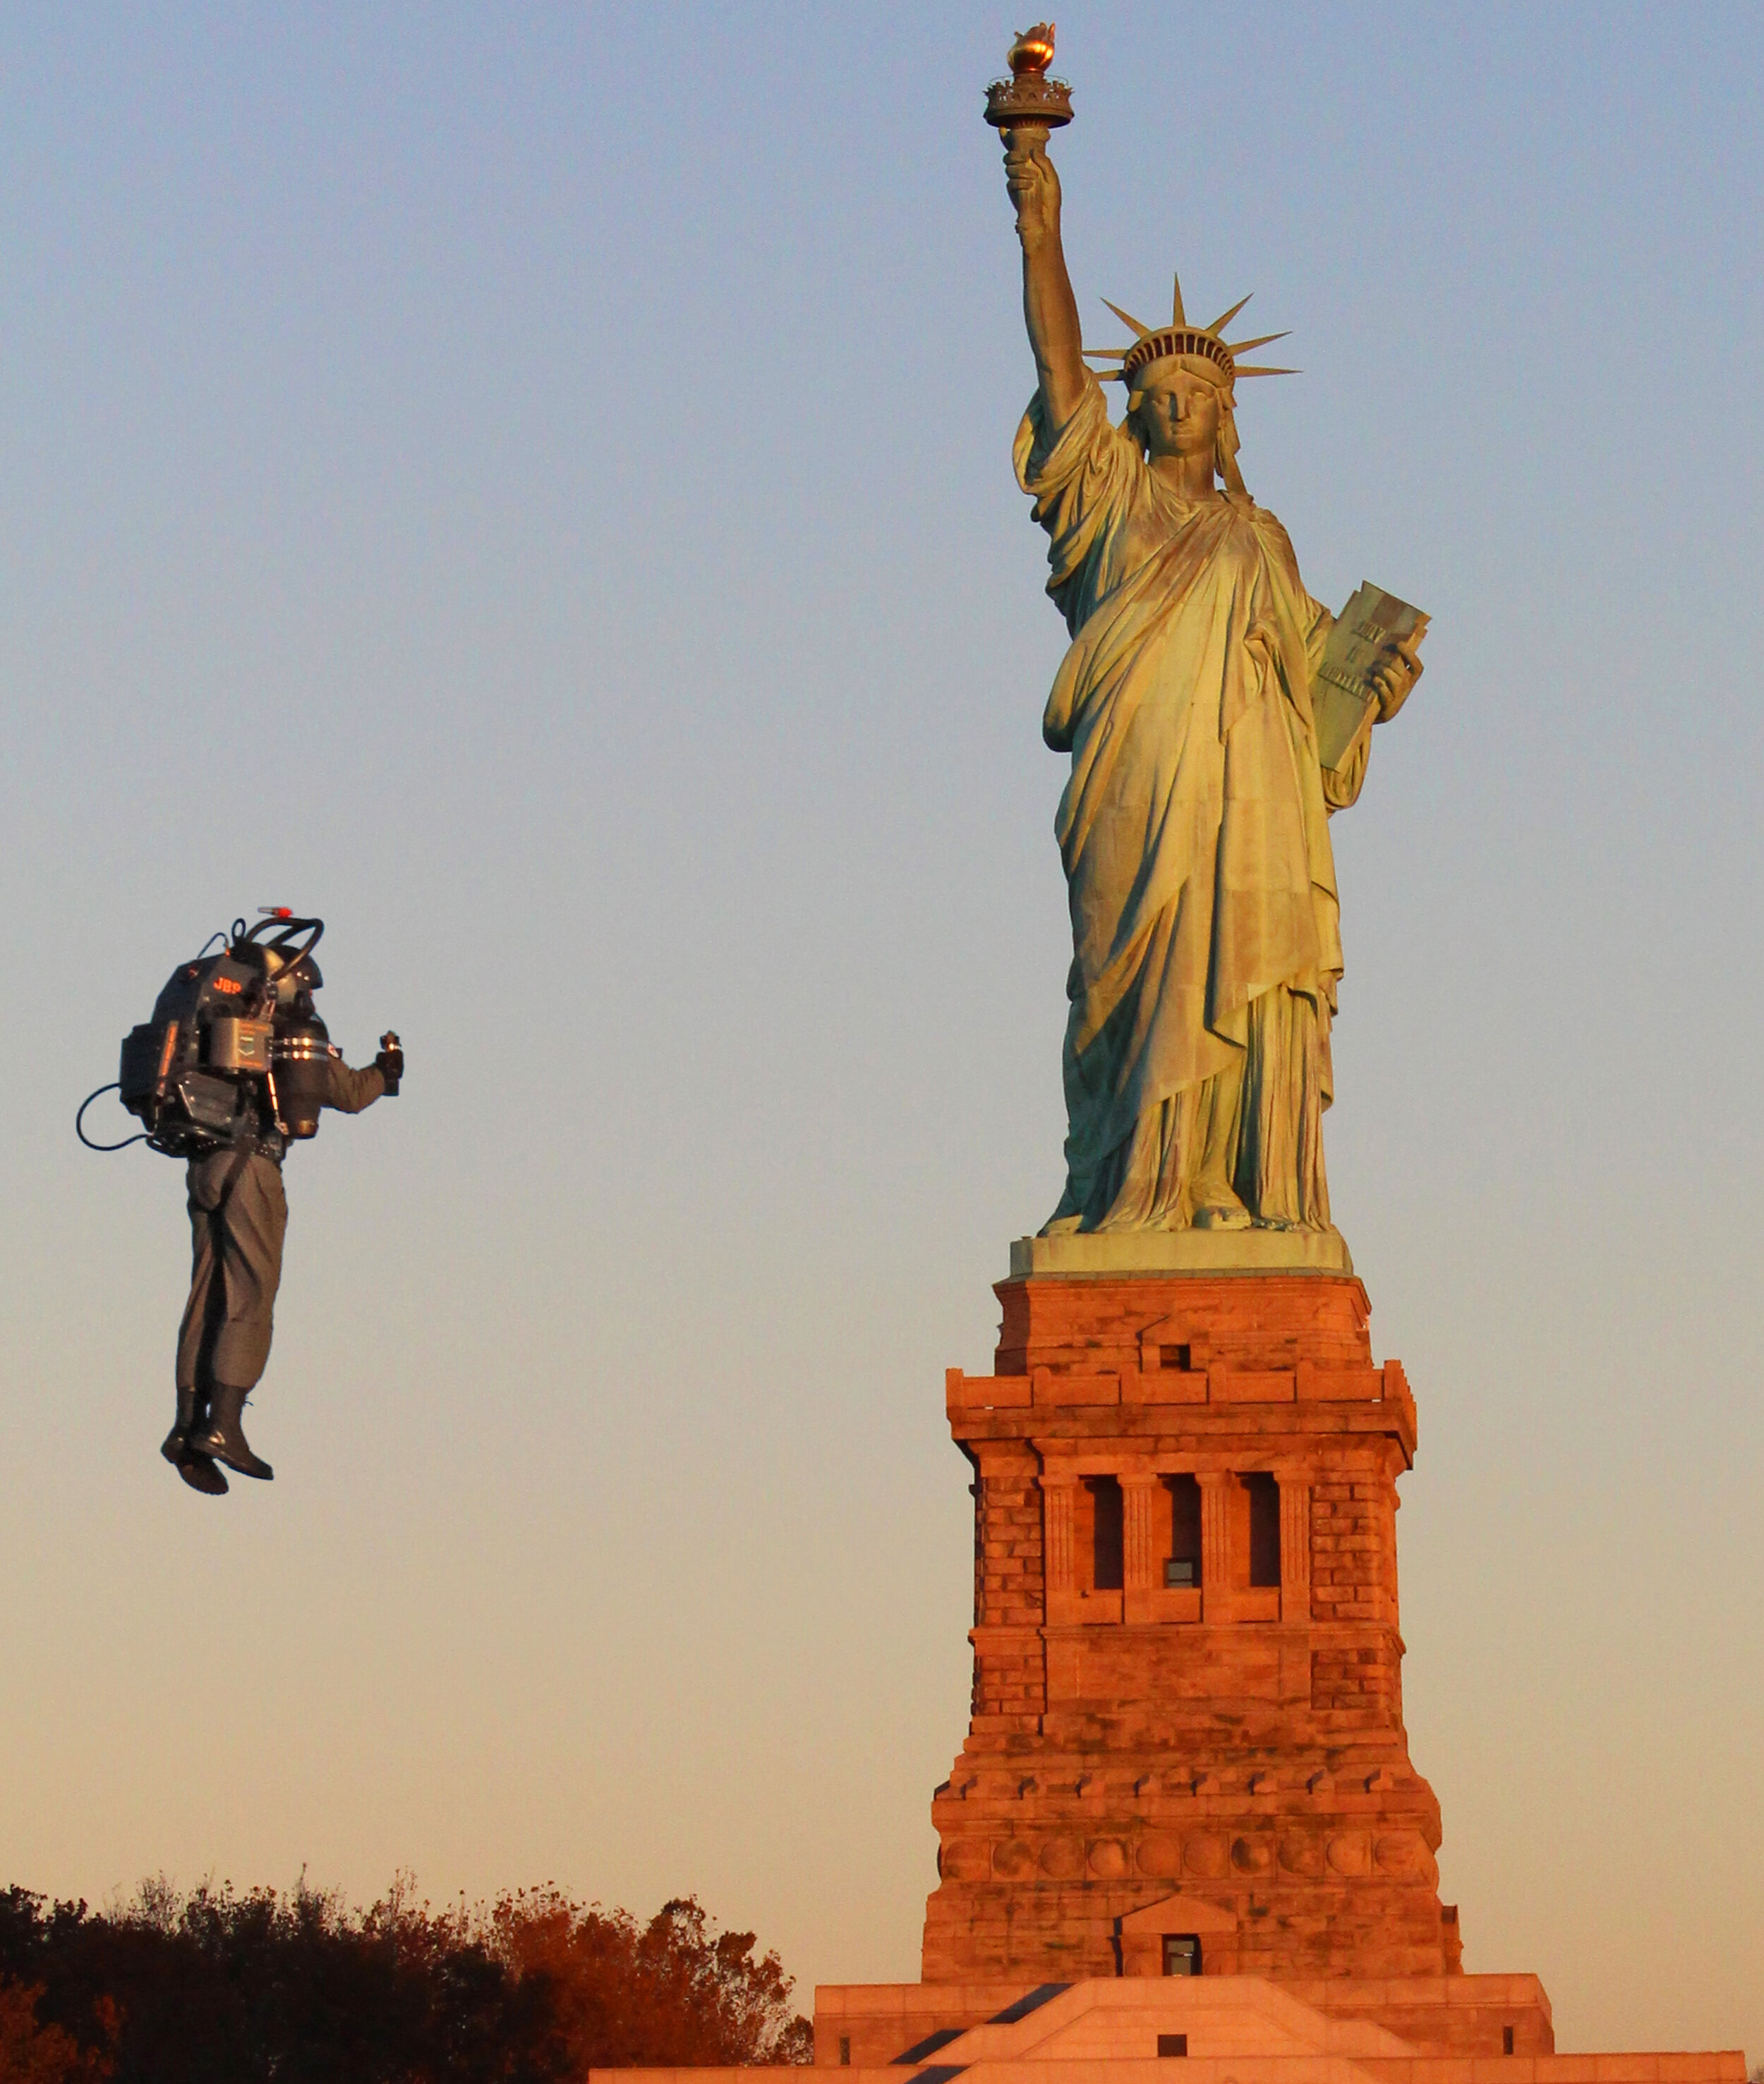 Mayman flying near the Statue of Liberty, in 2015.